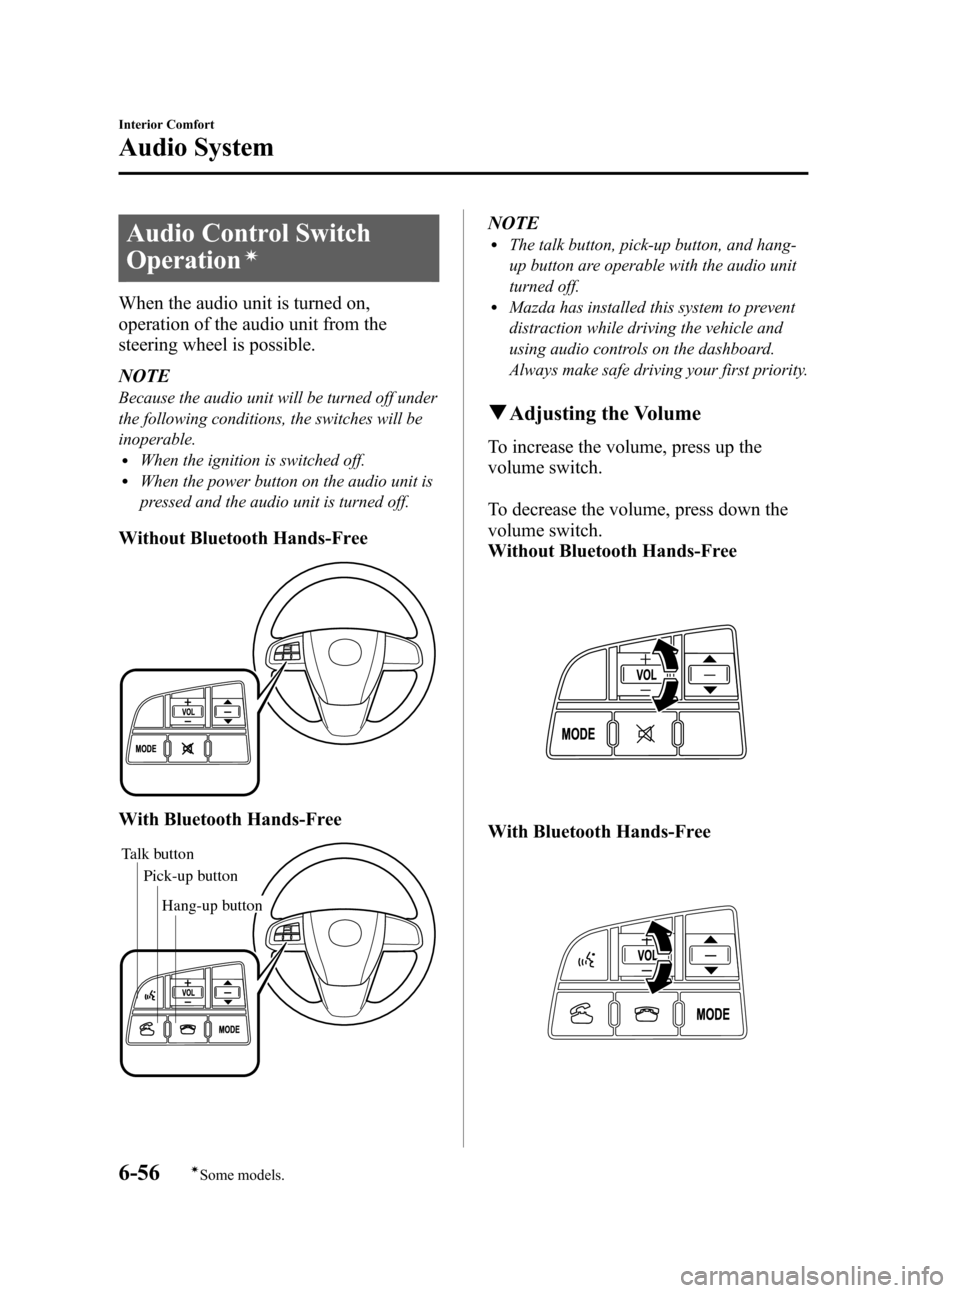 MAZDA MODEL 3 HATCHBACK 2012  Owners Manual (in English) Black plate (294,1)
Audio Control Switch
Operation
í
When the audio unit is turned on,
operation of the audio unit from the
steering wheel is possible.
NOTE
Because the audio unit will be turned off 